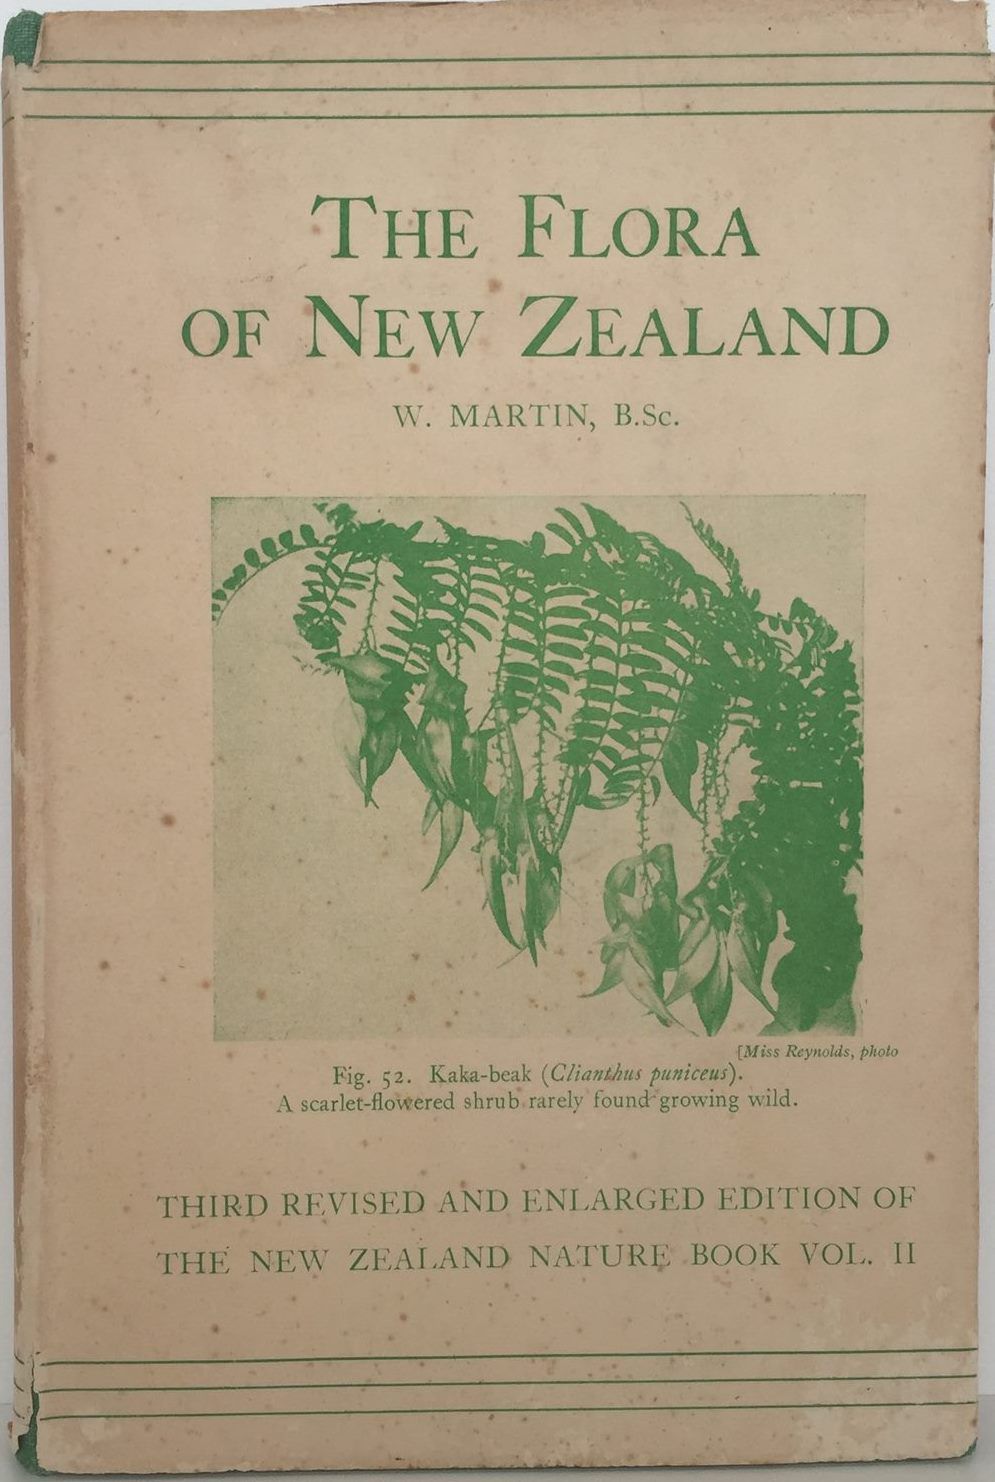 THE FLORA OF NEW ZEALAND: 3rd Revised Edition